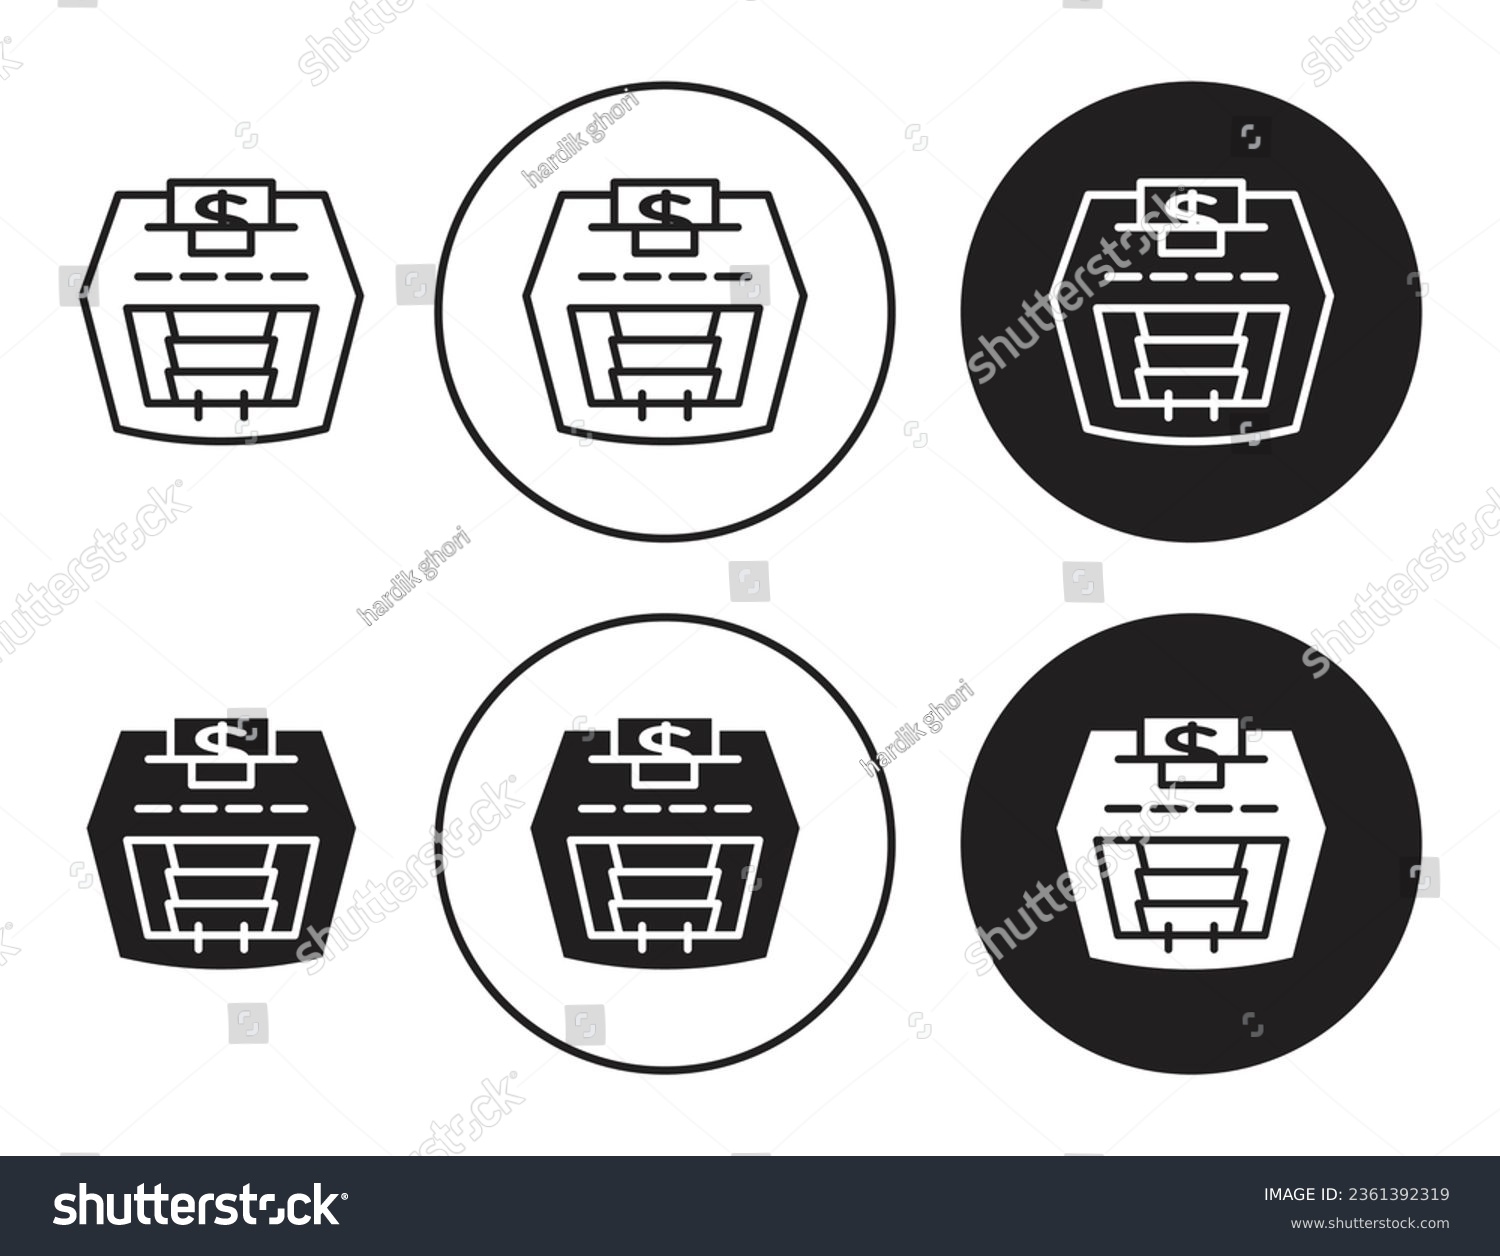 SVG of Money counting machine vector icon set in black color. svg